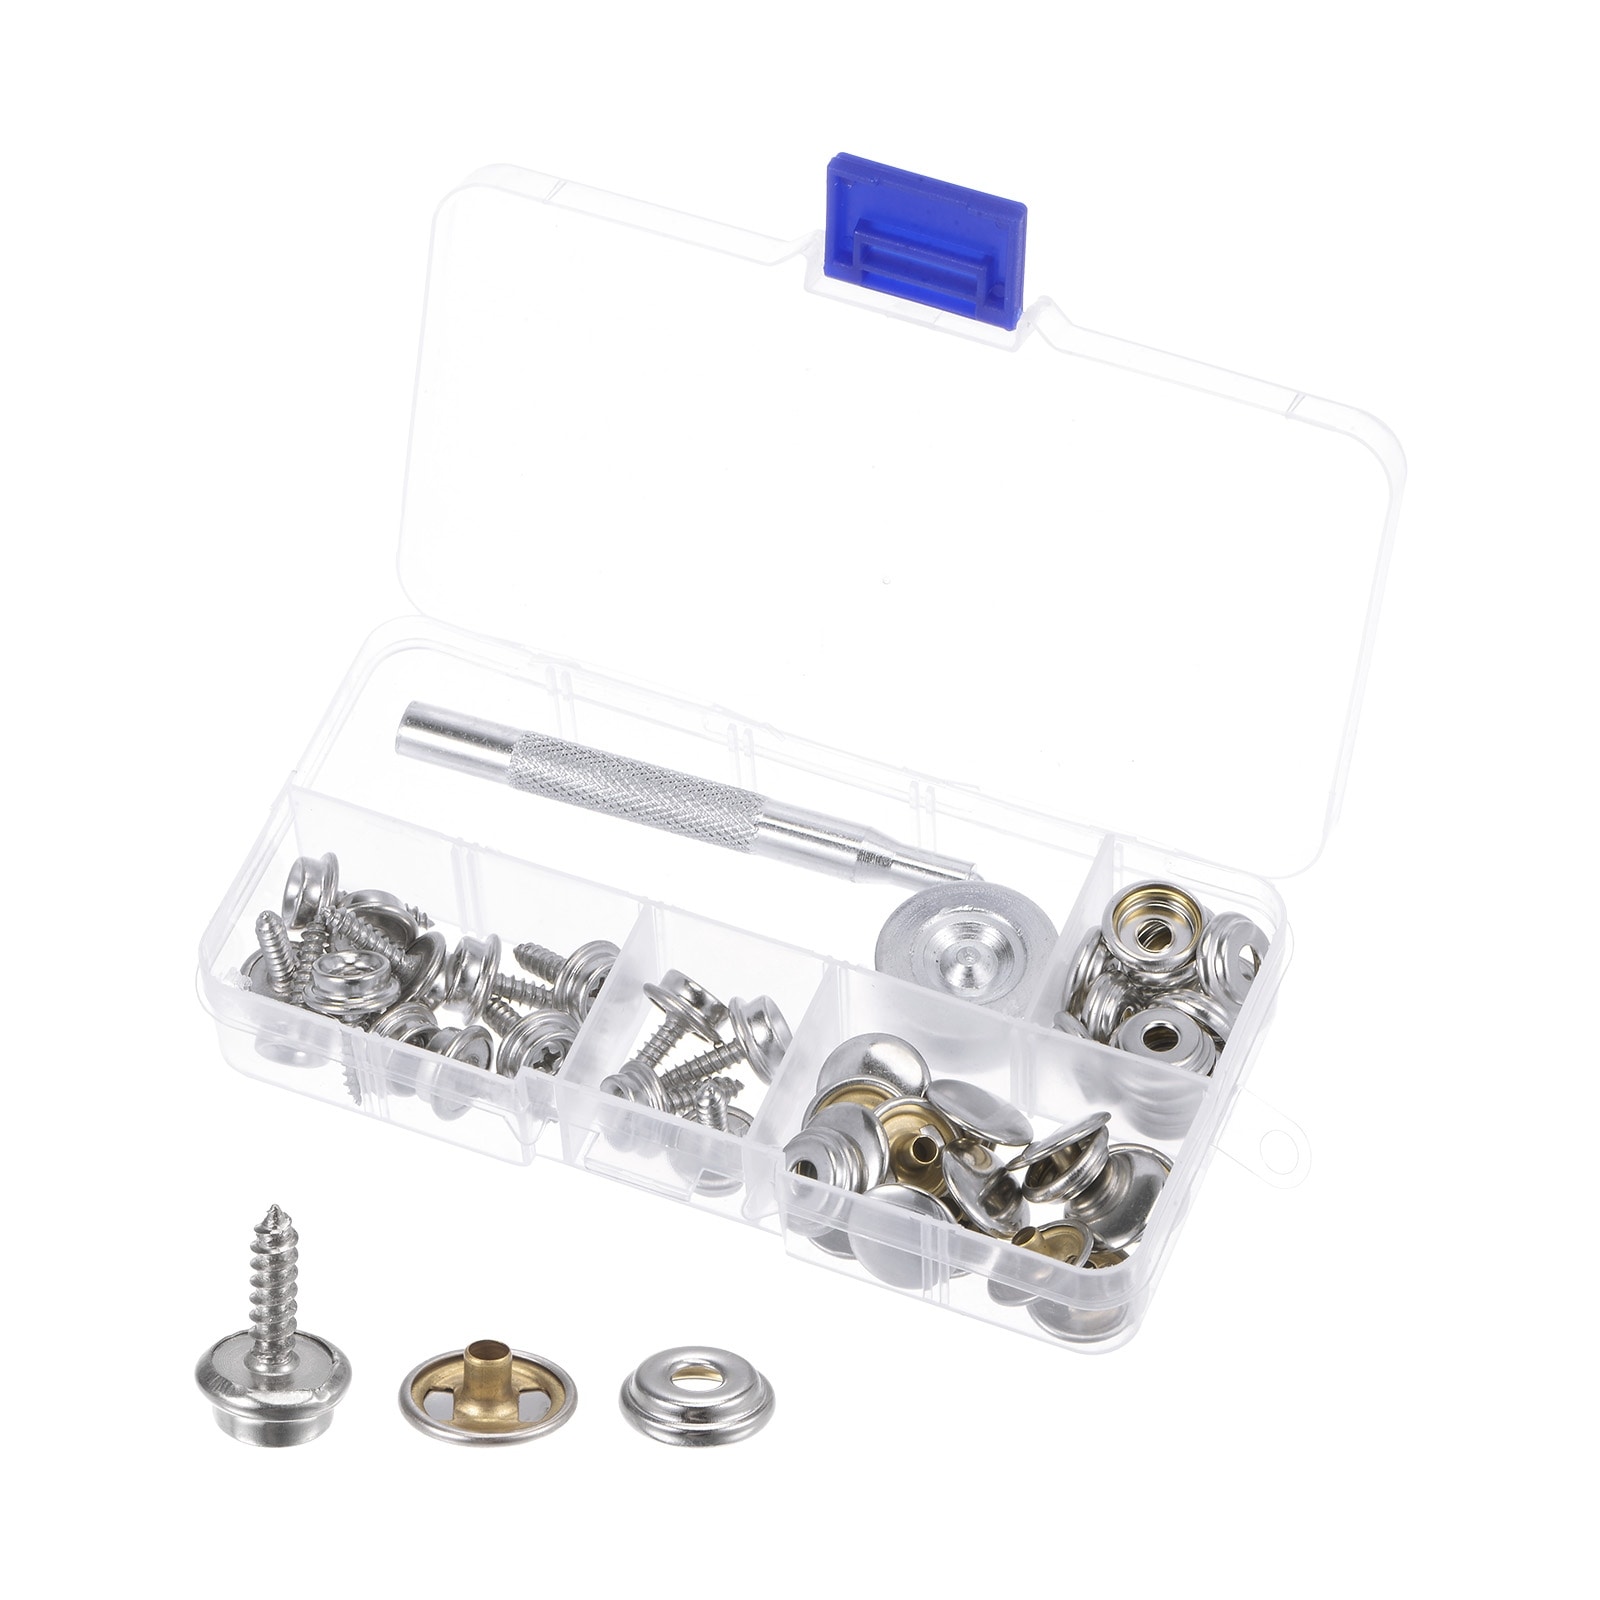 Unique Bargains 15 Sets Stainless Screw Snap Kit 15mm Copper Snaps Button with Tool, Silver Tone - Silver Tone